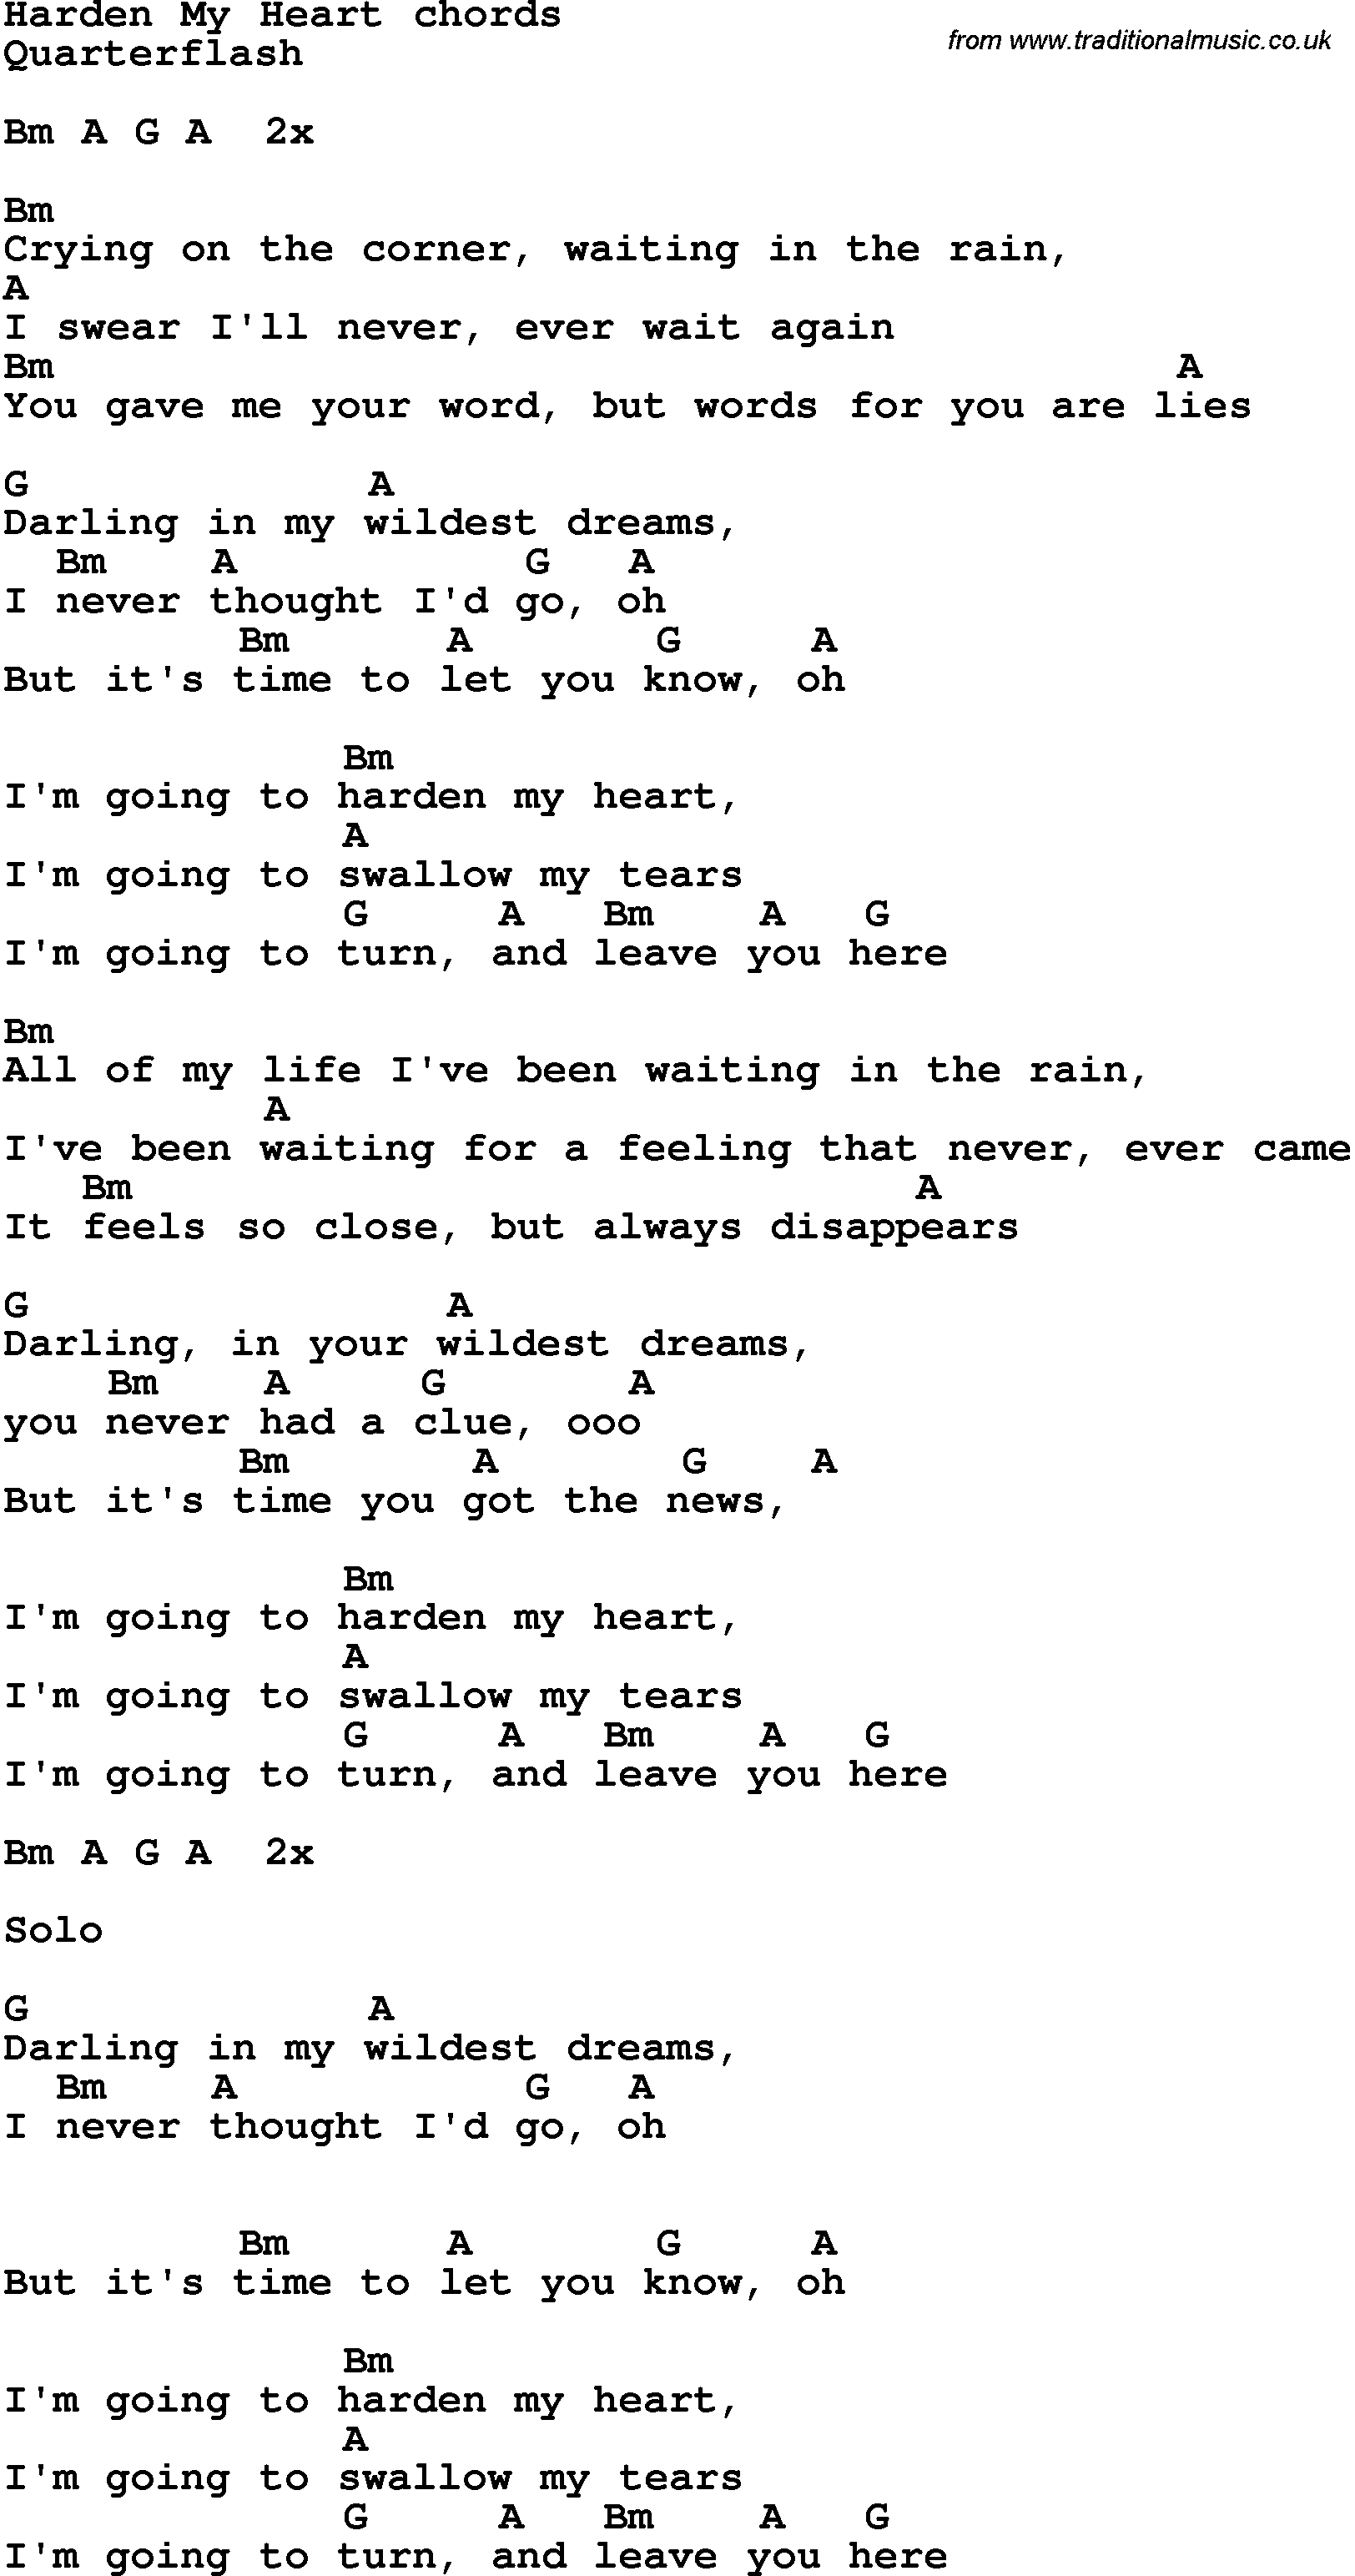 Song Lyrics with guitar chords for Harden My Heart